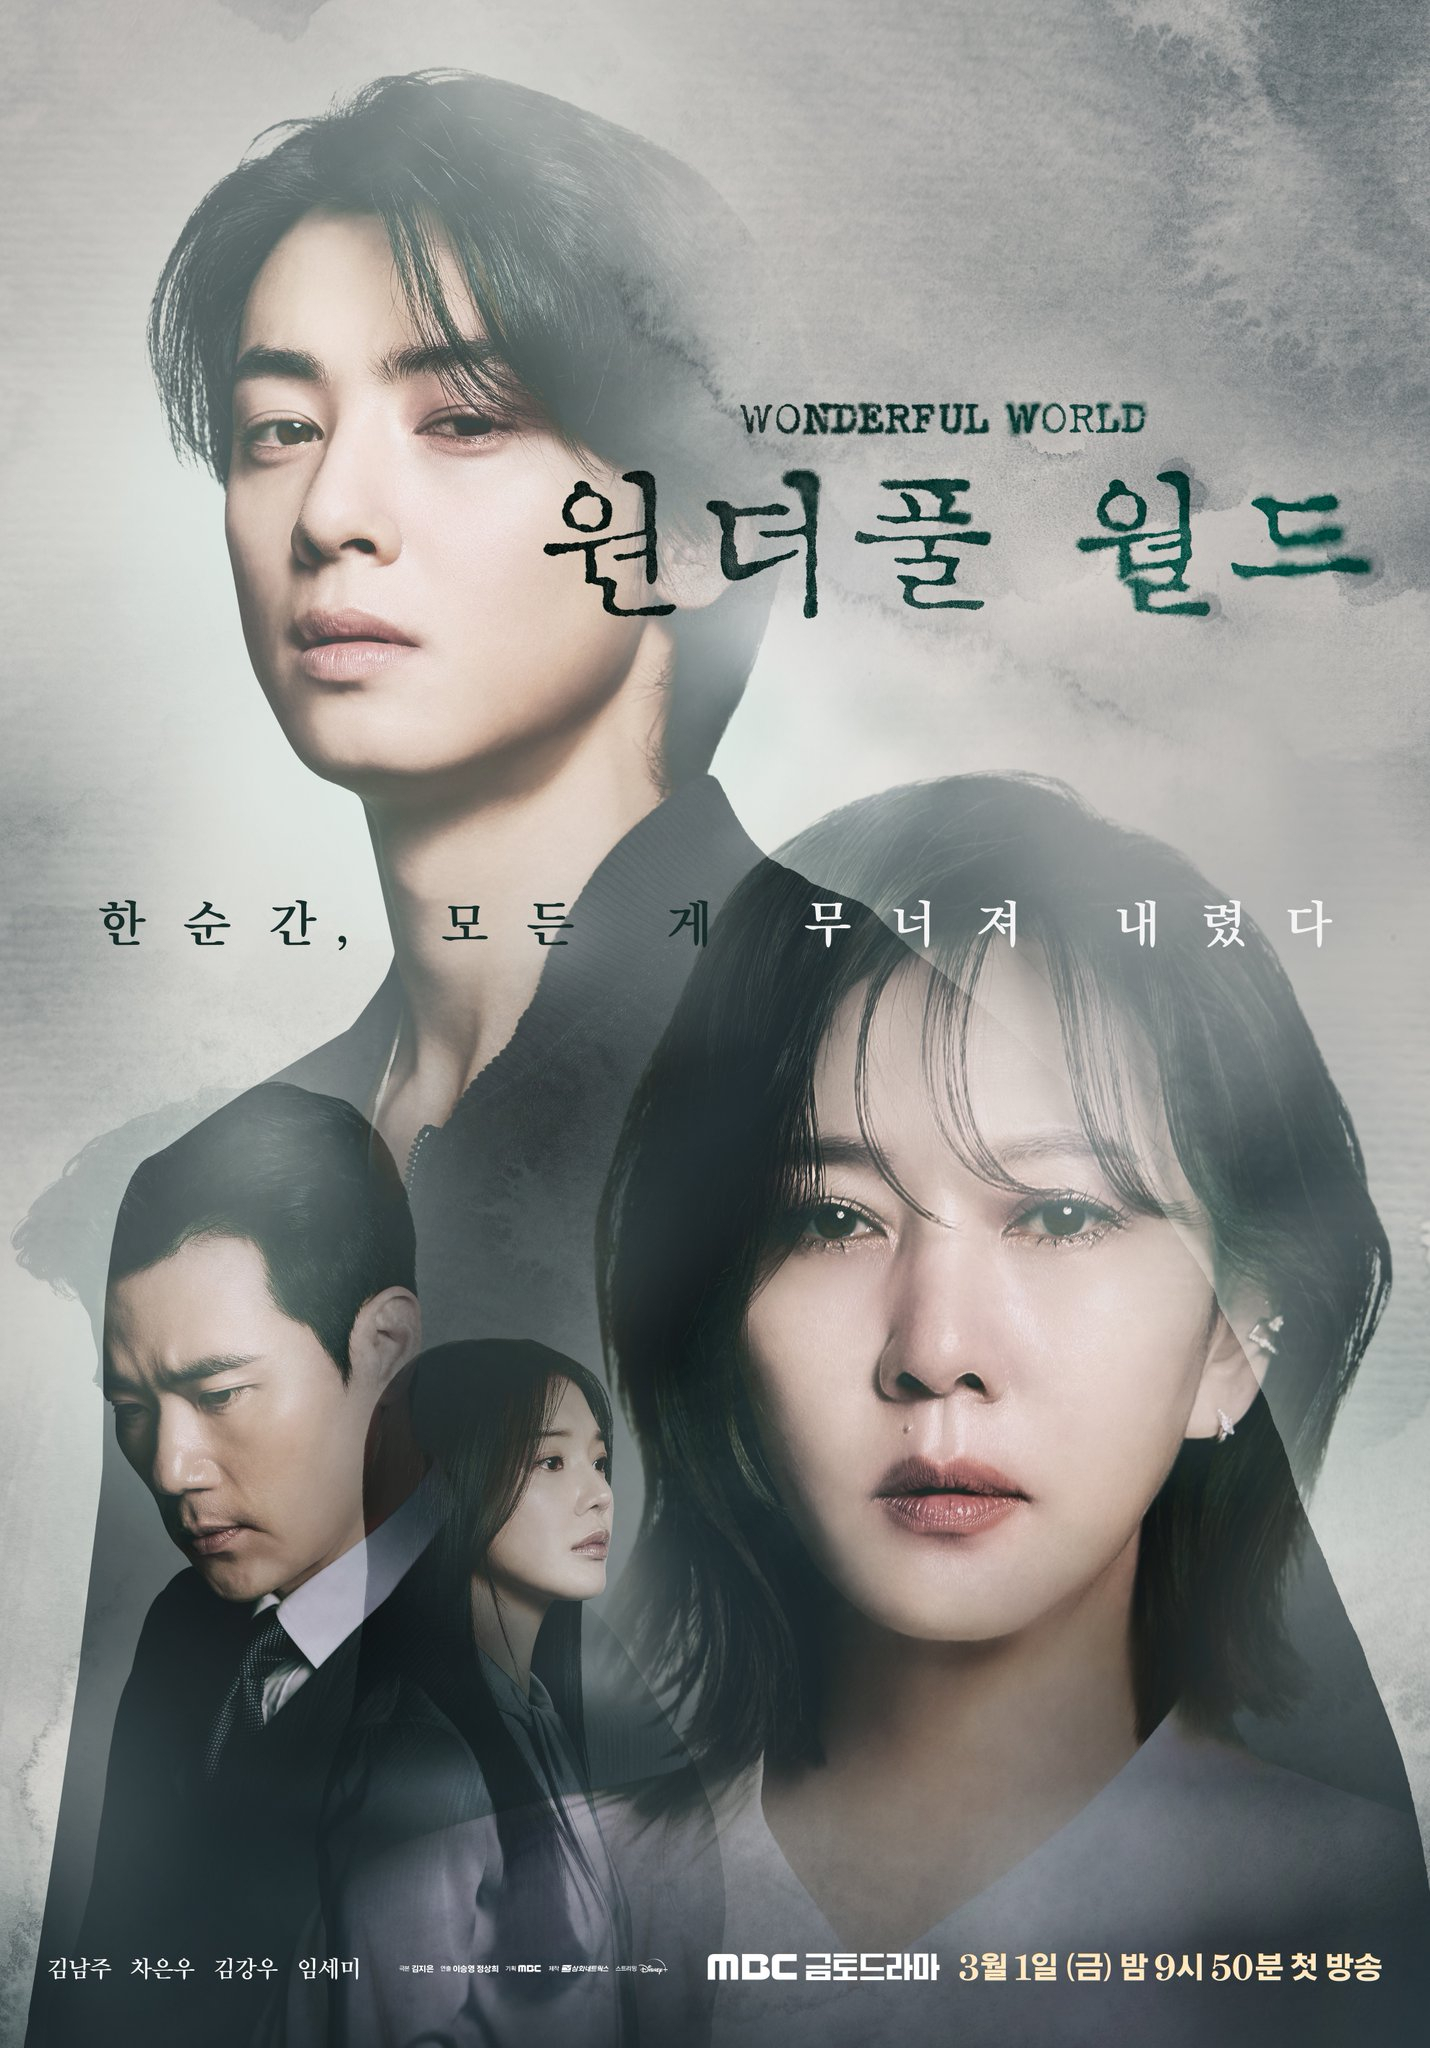 Wonderful World Episode 2 How to Watch, Airdate, Preview, Spoilers